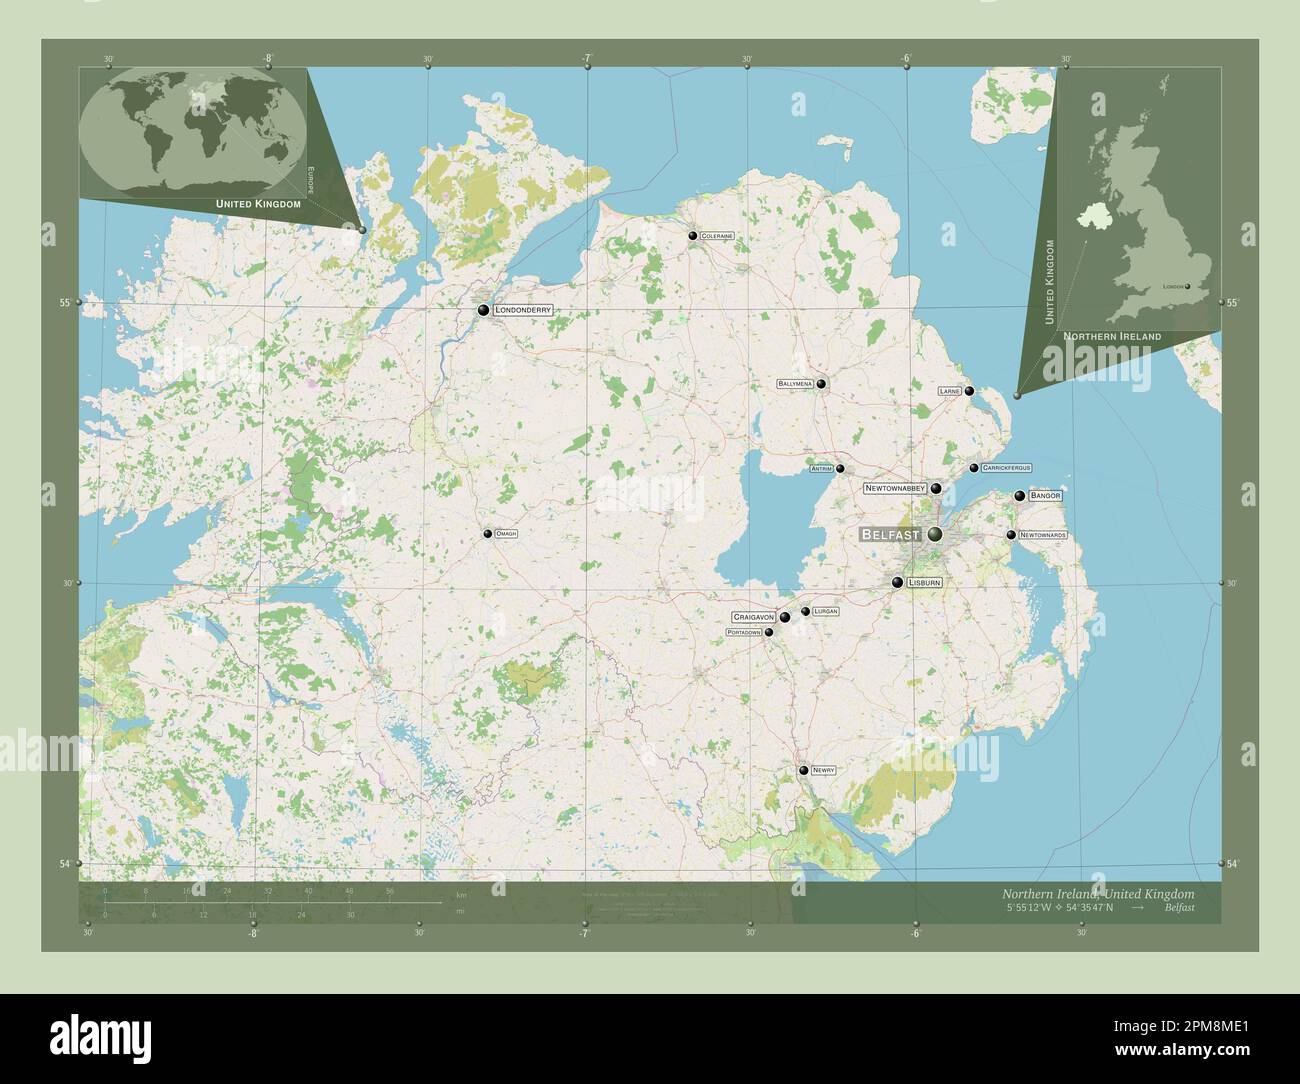 Northern Ireland, region of United Kingdom. Open Street Map. Locations and names of major cities of the region. Corner auxiliary location maps Stock Photo